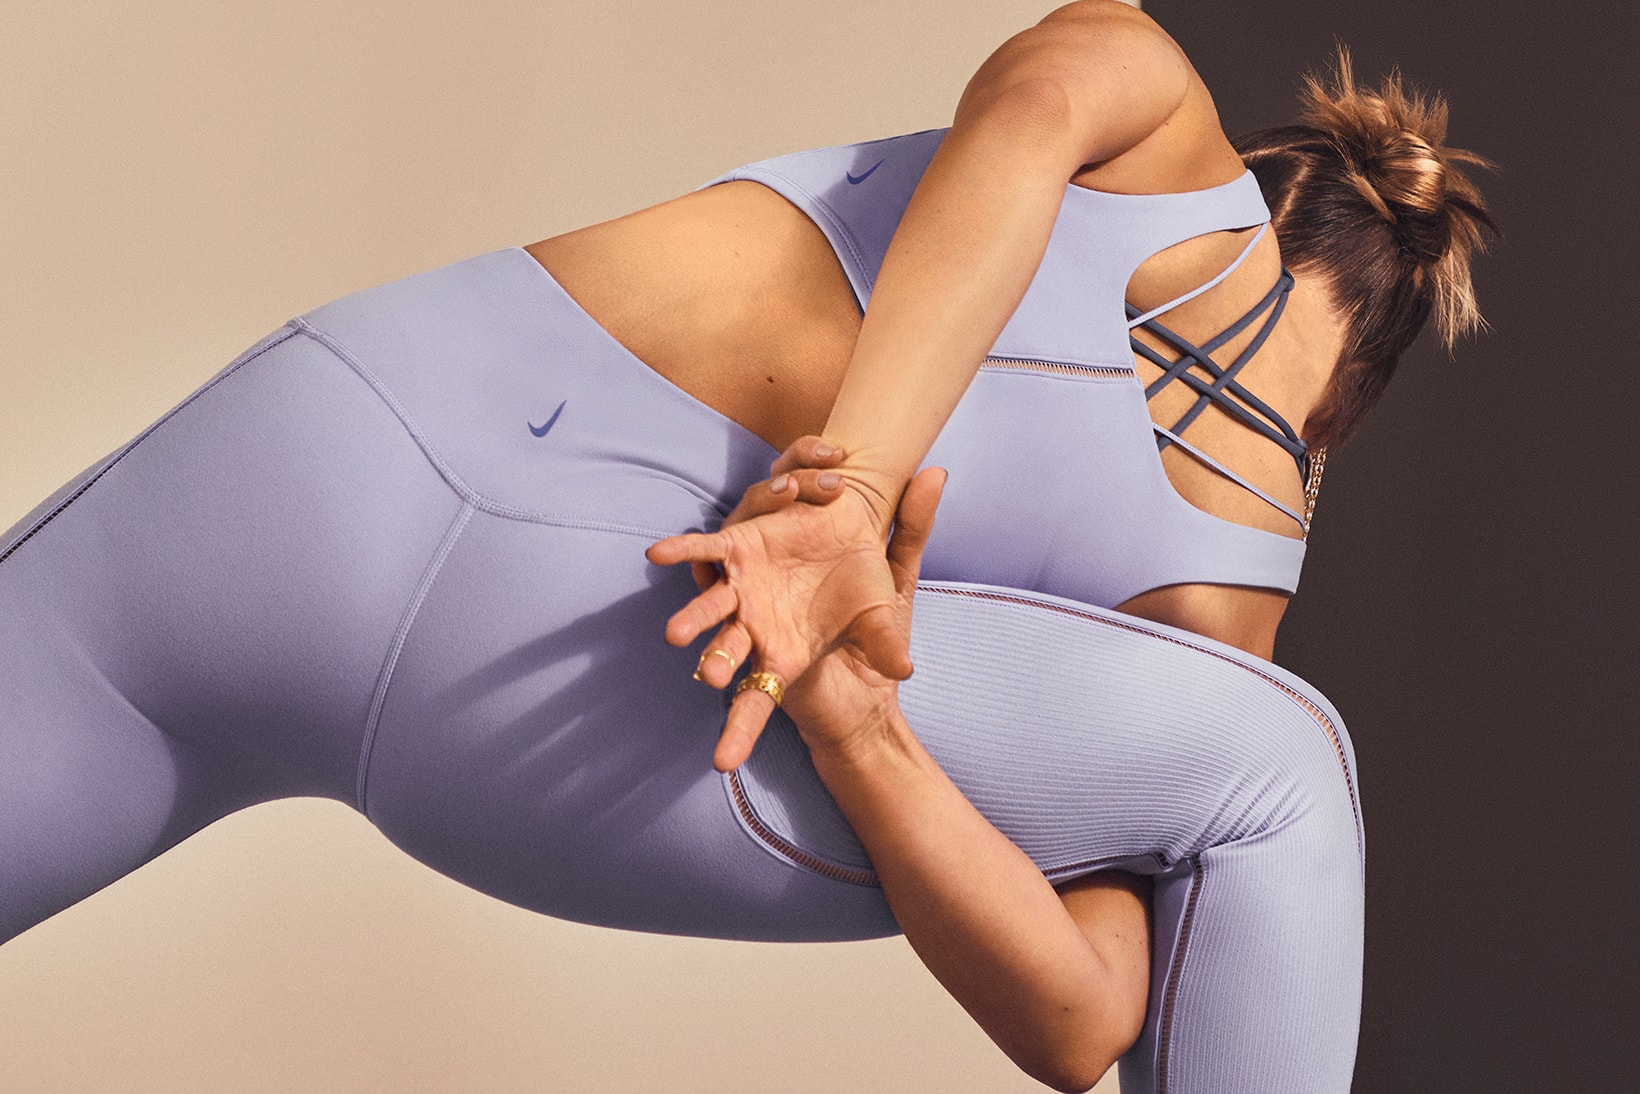 According to Bella Hadid and TikTok, Leggings Are Out, and Yoga